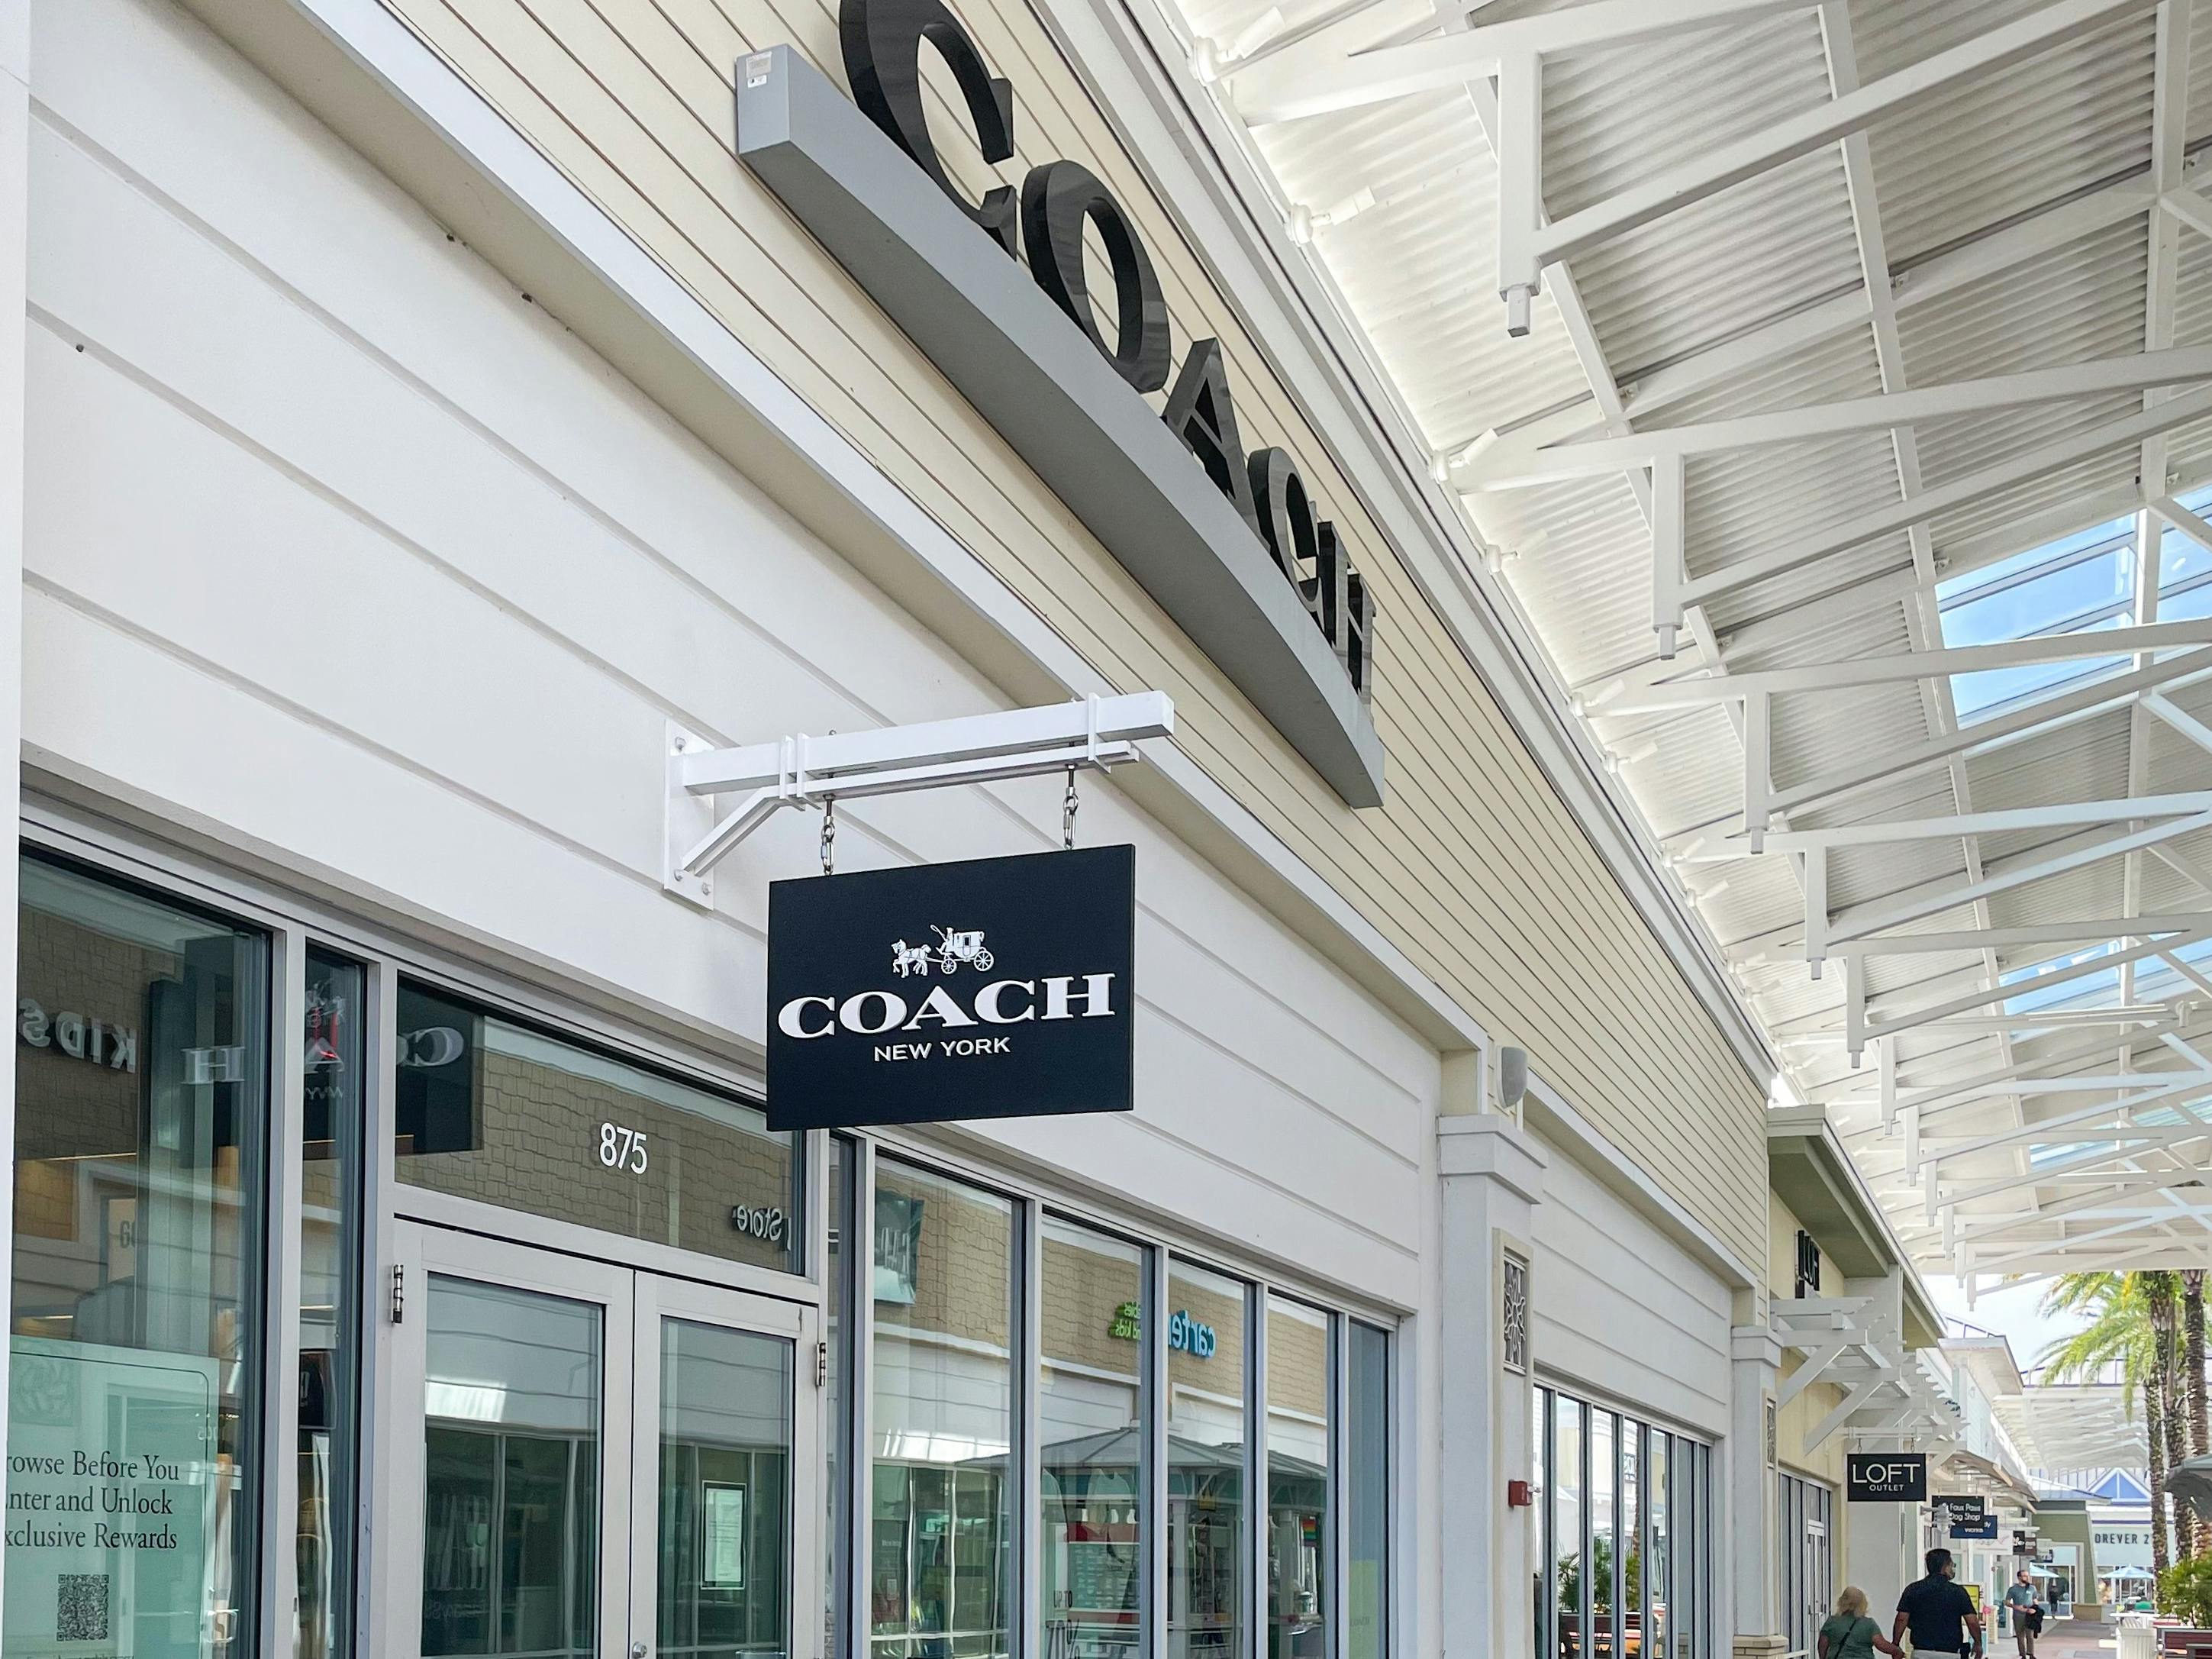 How to Buy a Real Coach Bag for Knockoff or Outlet Prices - The Krazy Coupon  Lady